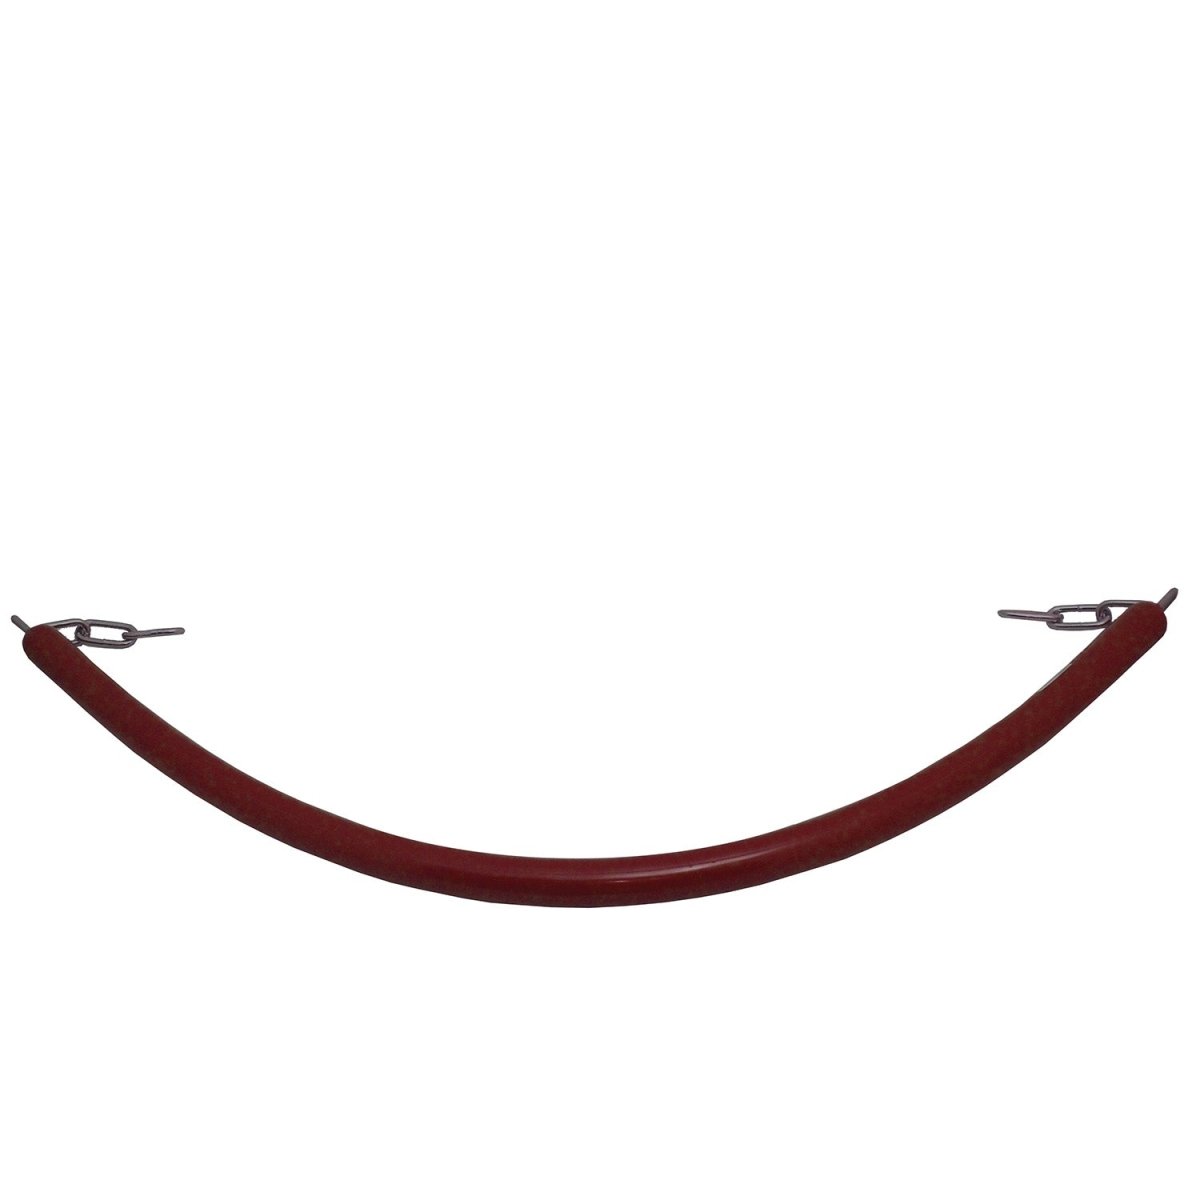 Horsemen'S Pride Stall Chain with Clips - Maroon -